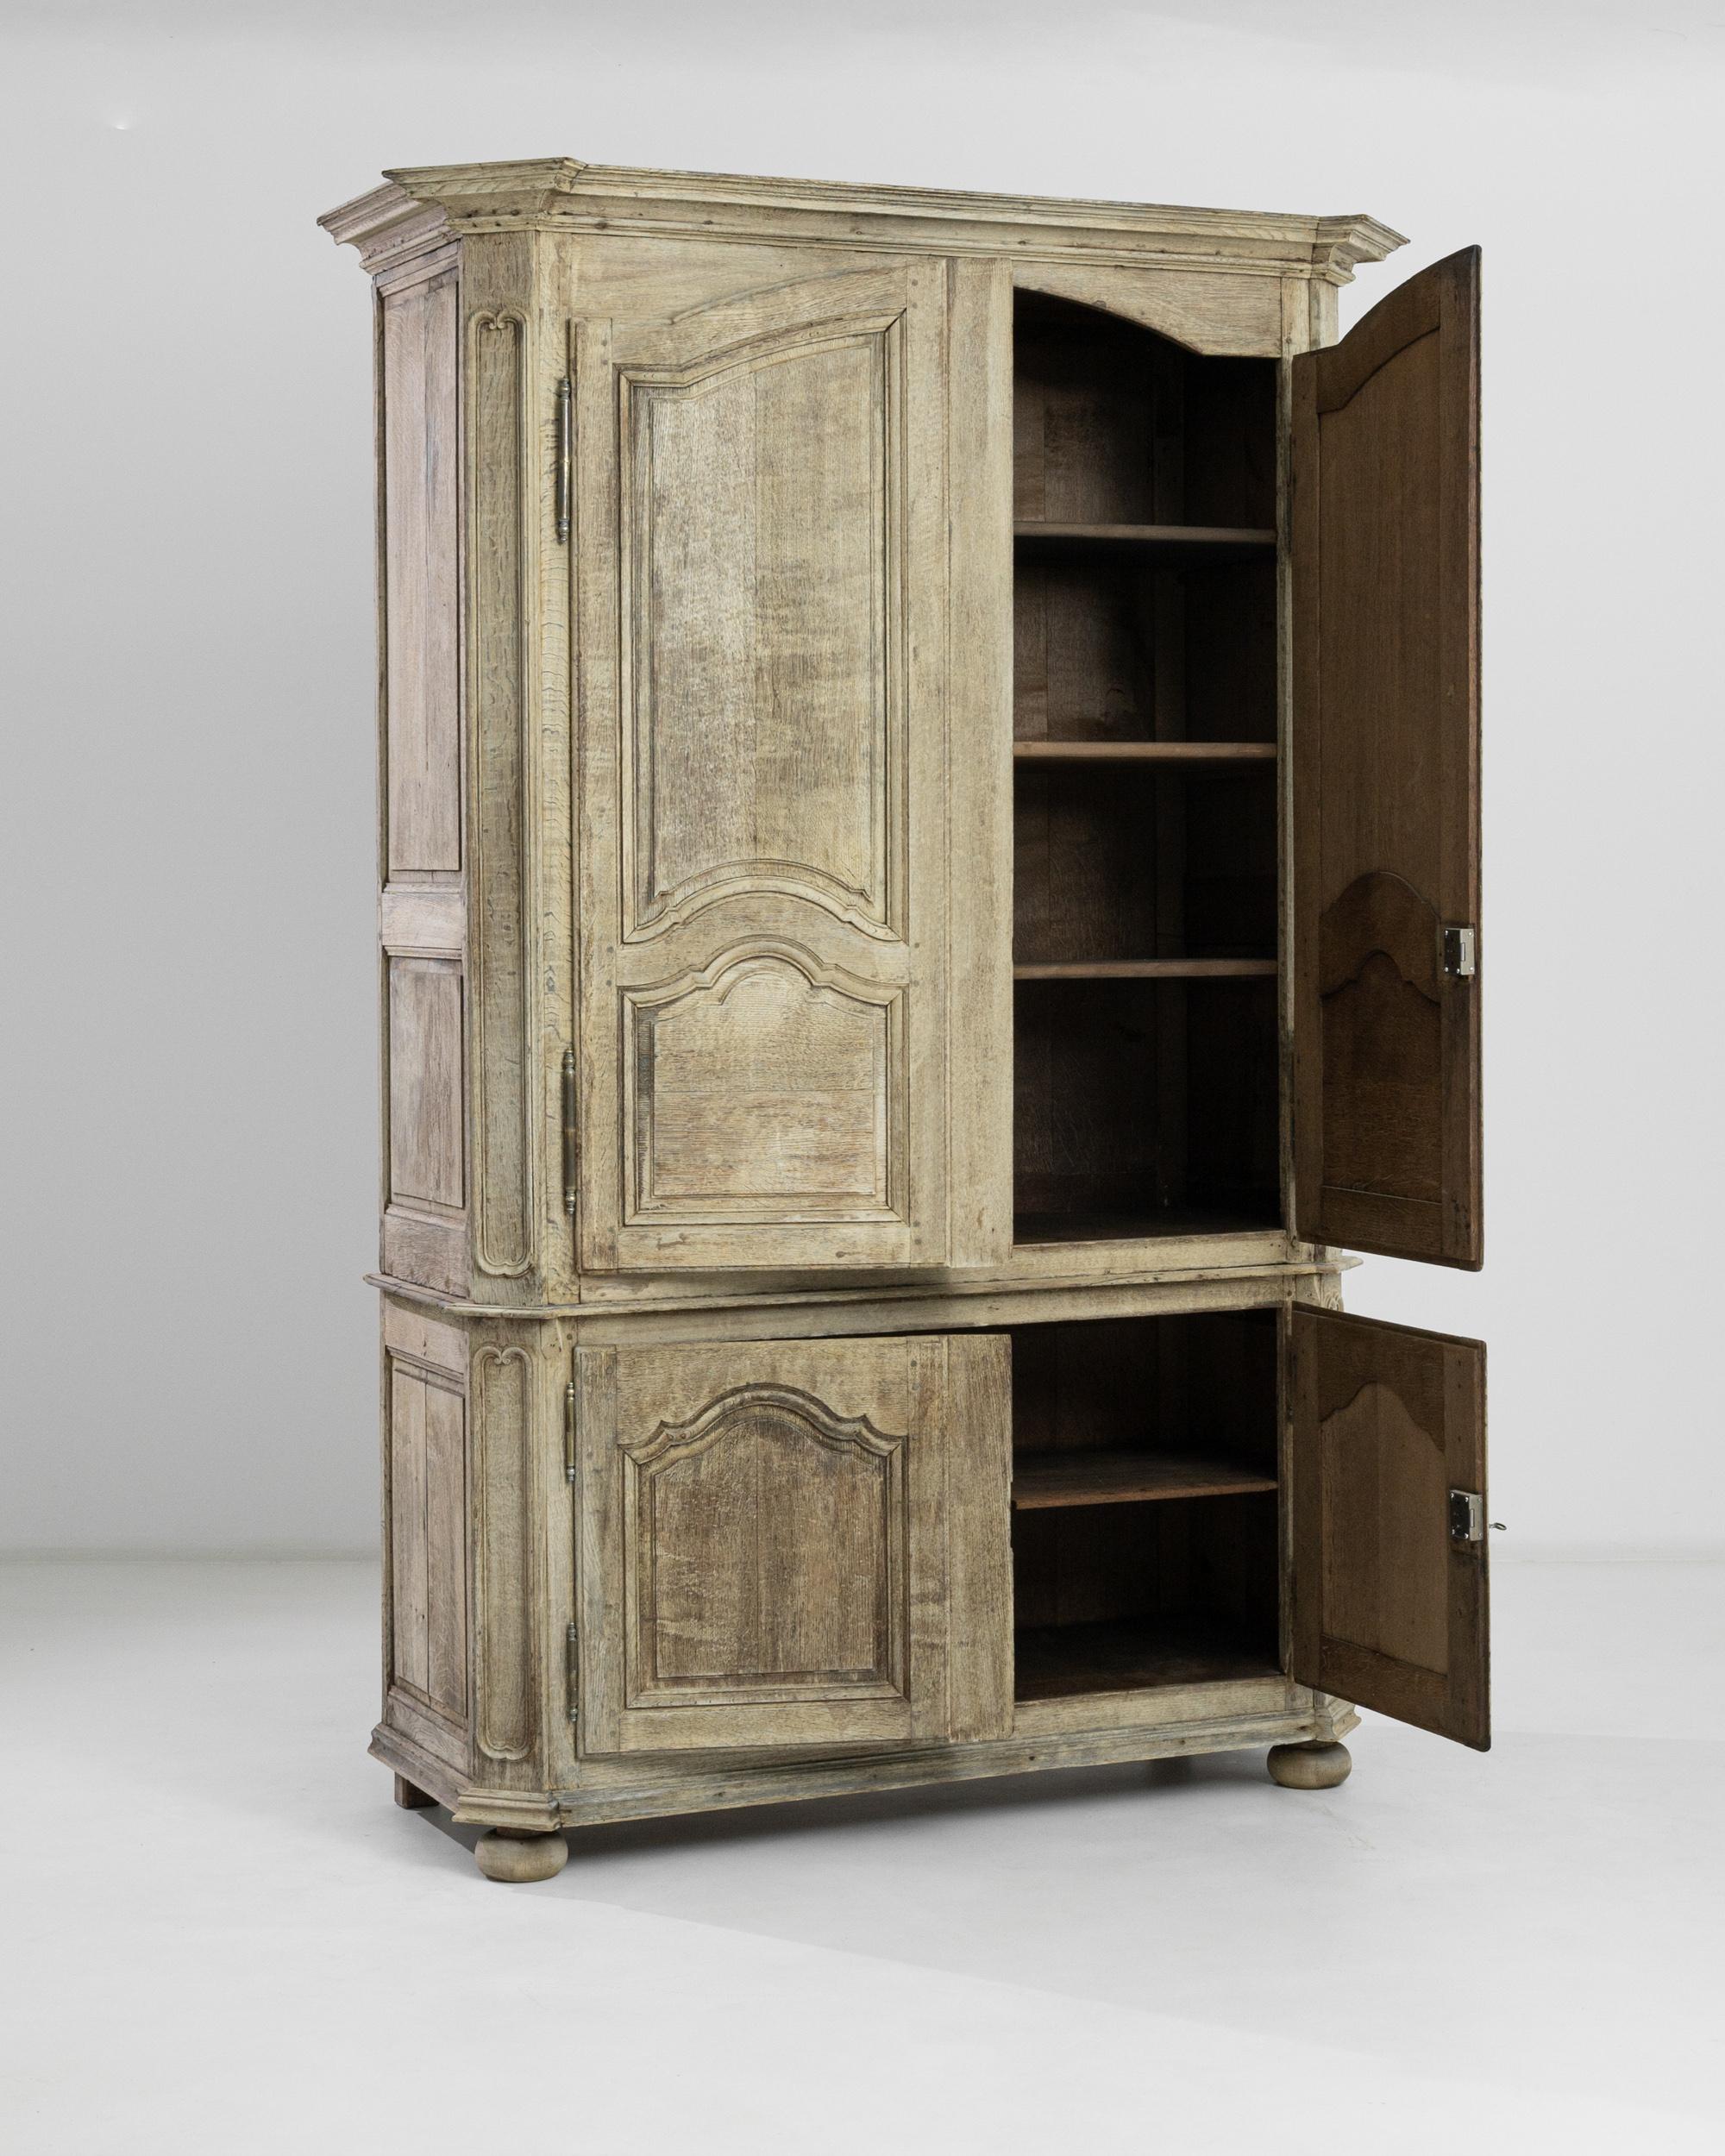 This tall armoire was crafted in Belgium, circa 1820. Standing on bun feet, this antique treasure features a carved front, brass scrolled escutcheons and an angled molded crown for an original profile. The doors open to reveal the natural chocolate